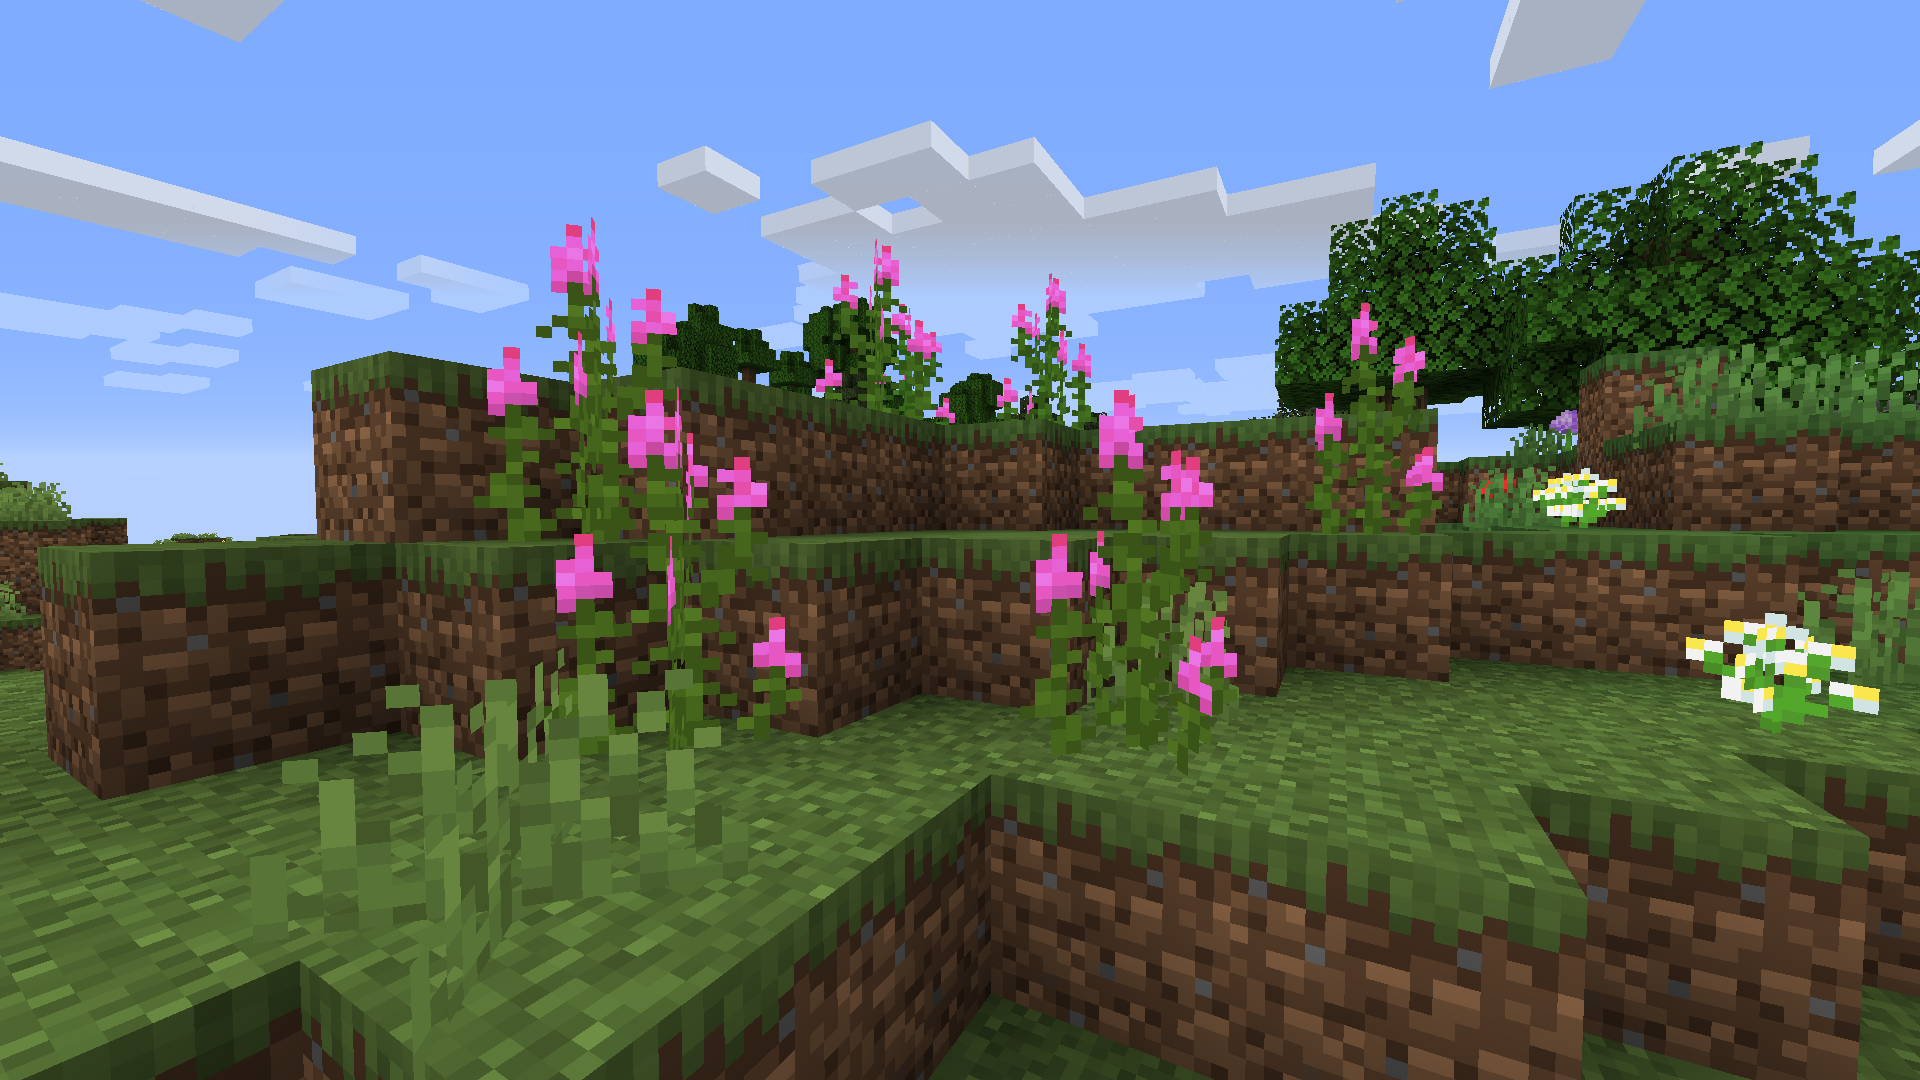 Fireweed in a forest (1.1)